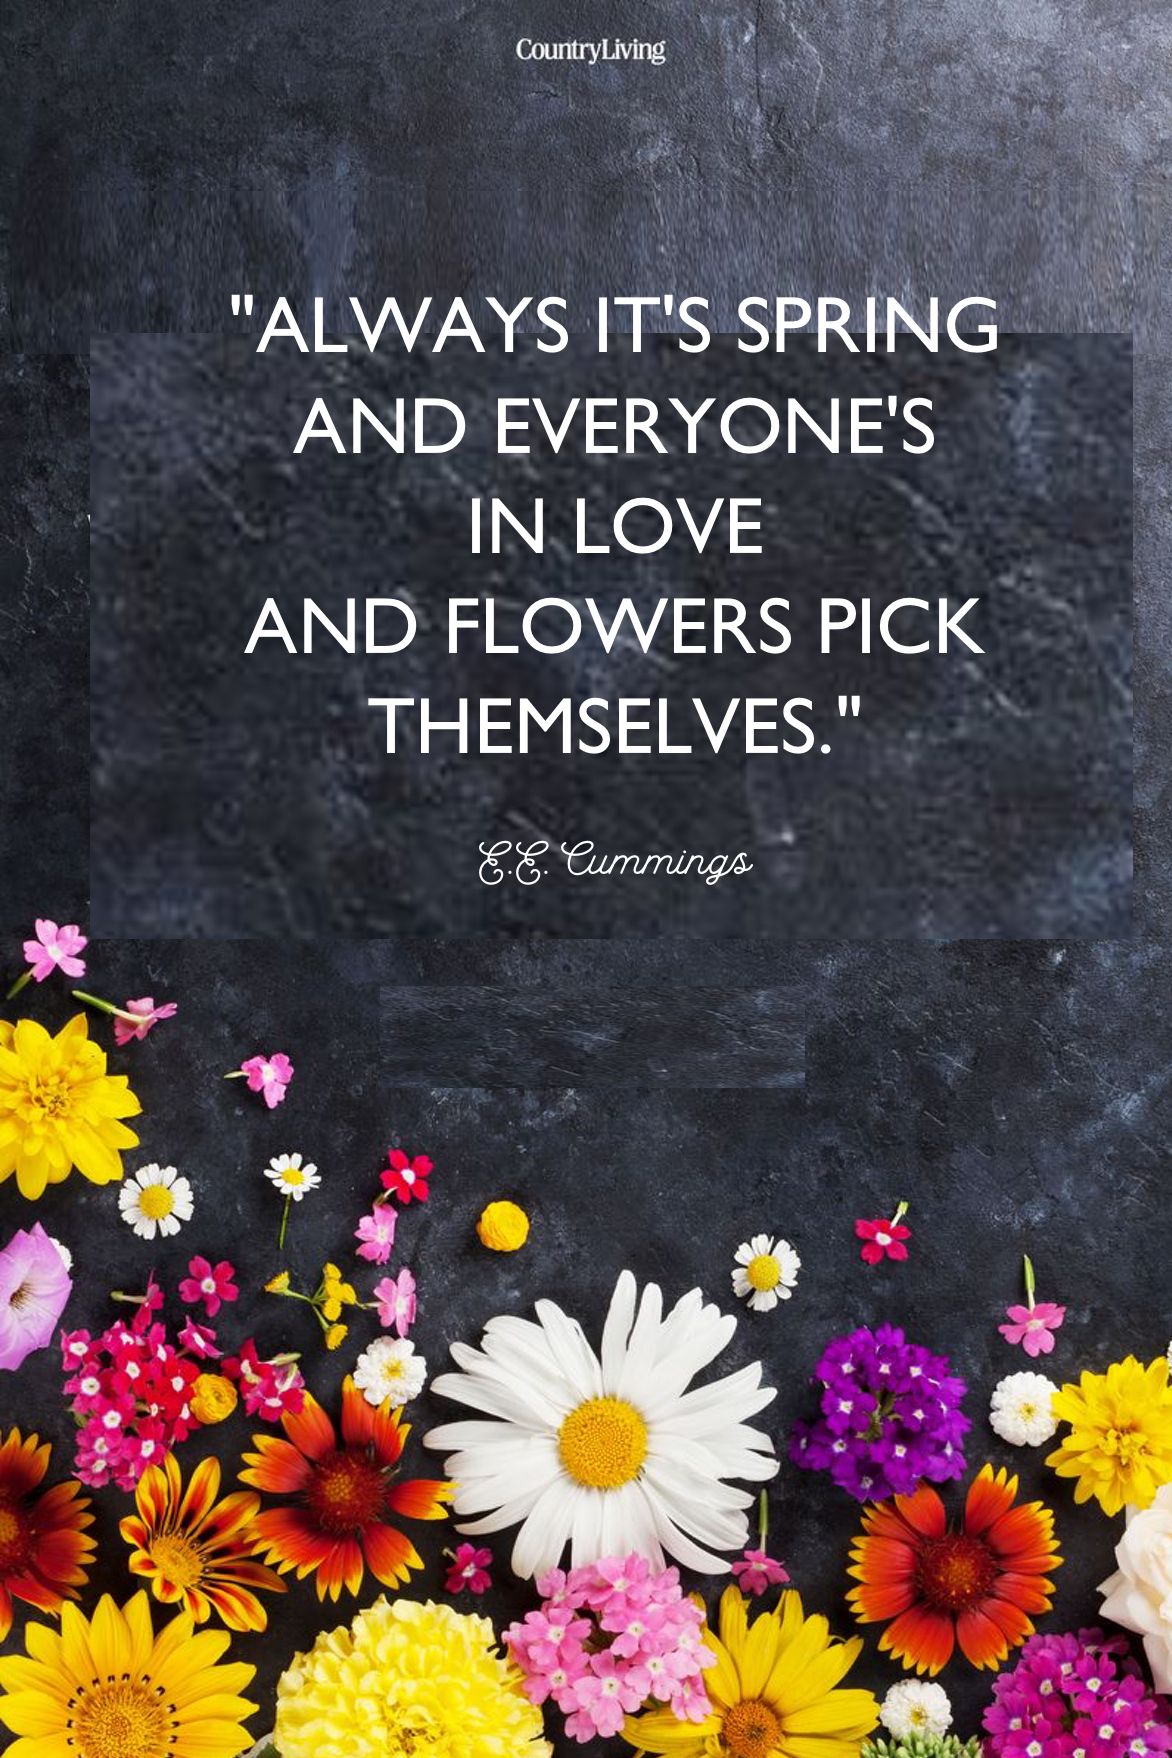 Buy Her Flowers Just Because Quotes - memmiblog